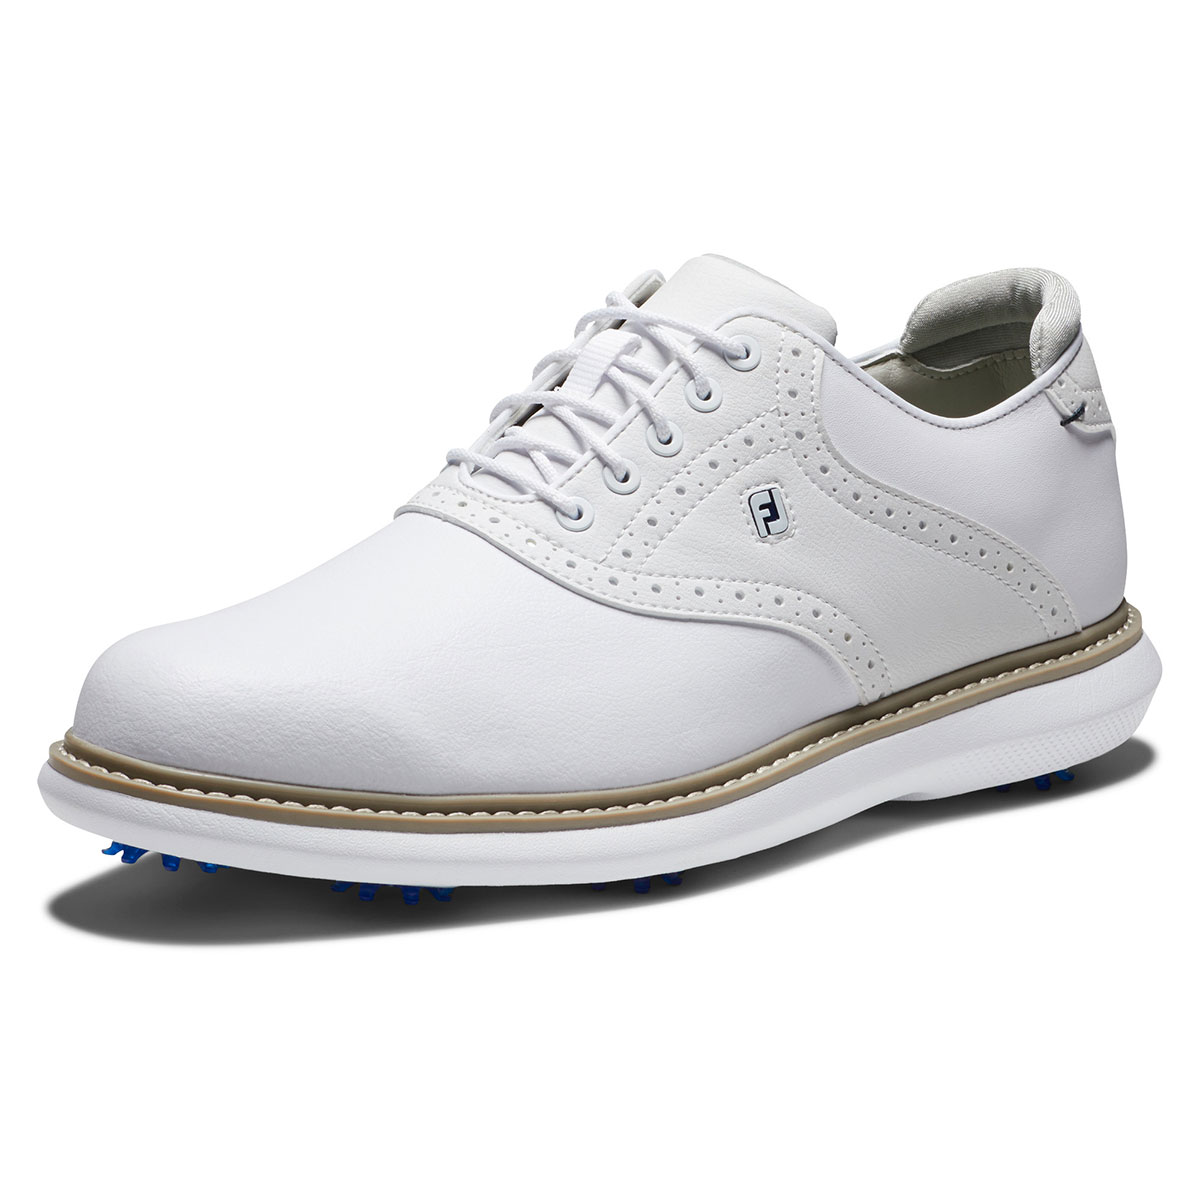 FootJoy Traditions Shoes | Online Golf